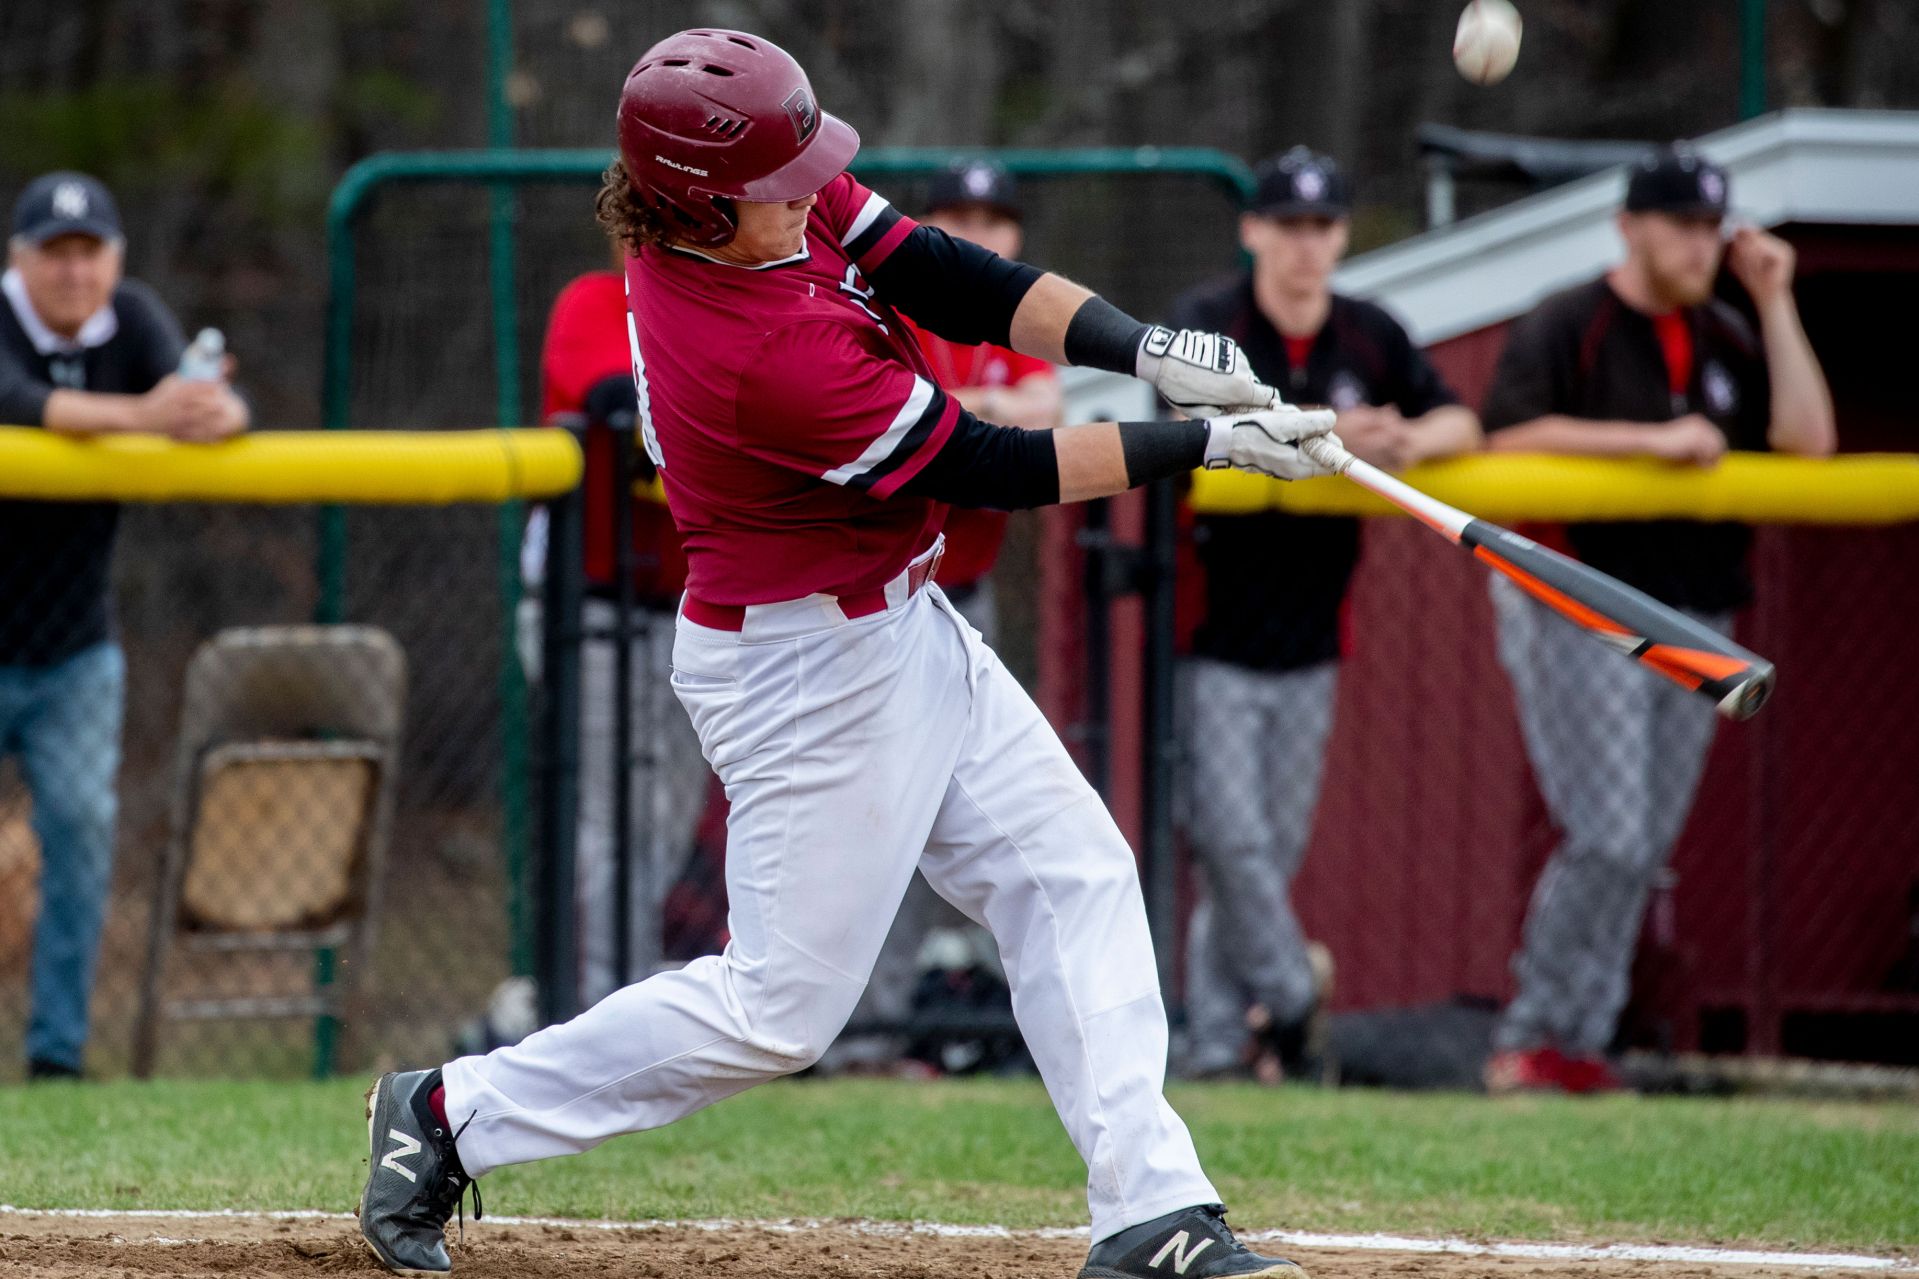 Video: In march to NESCAC playoffs baseball keeps things seriously fun